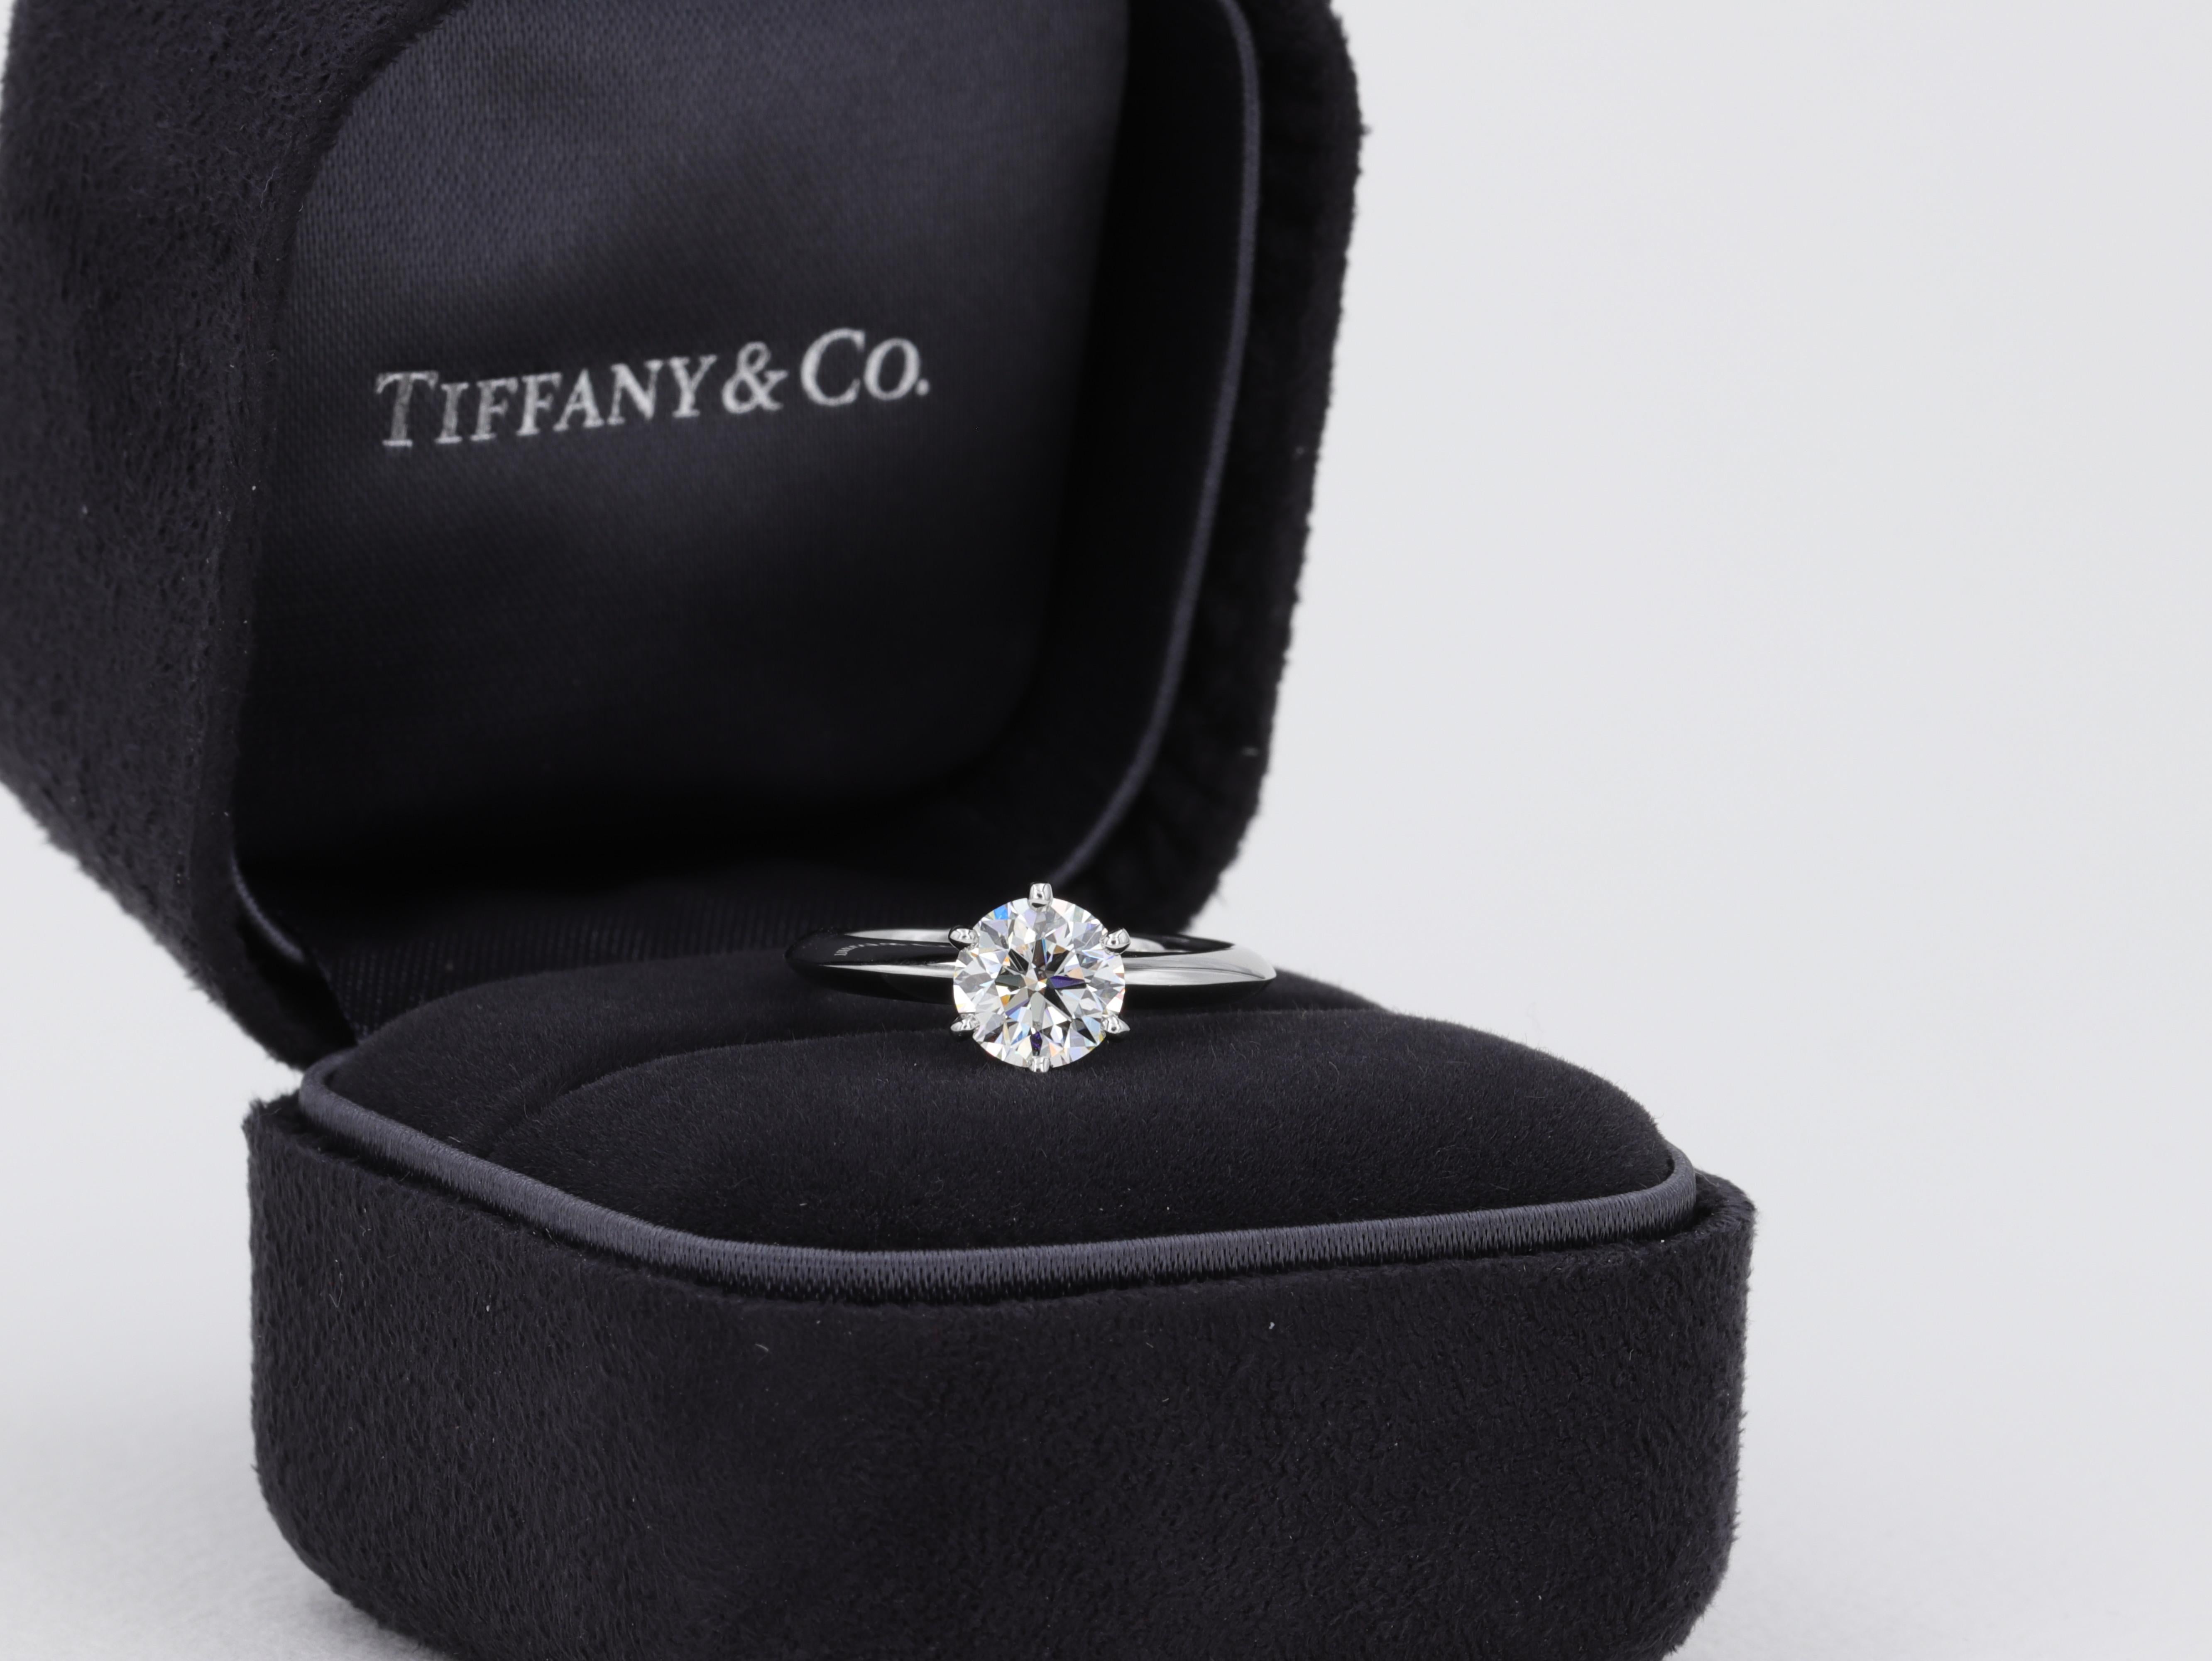 This classic Tiffany & Co. solitaire diamond engagement ring features a 1.09 carat round brilliant cut diamond graded I in color and VS1 clarity by Tiffany & Co. 

The ring is accompanied by the original inside and outside boxes, original diamond